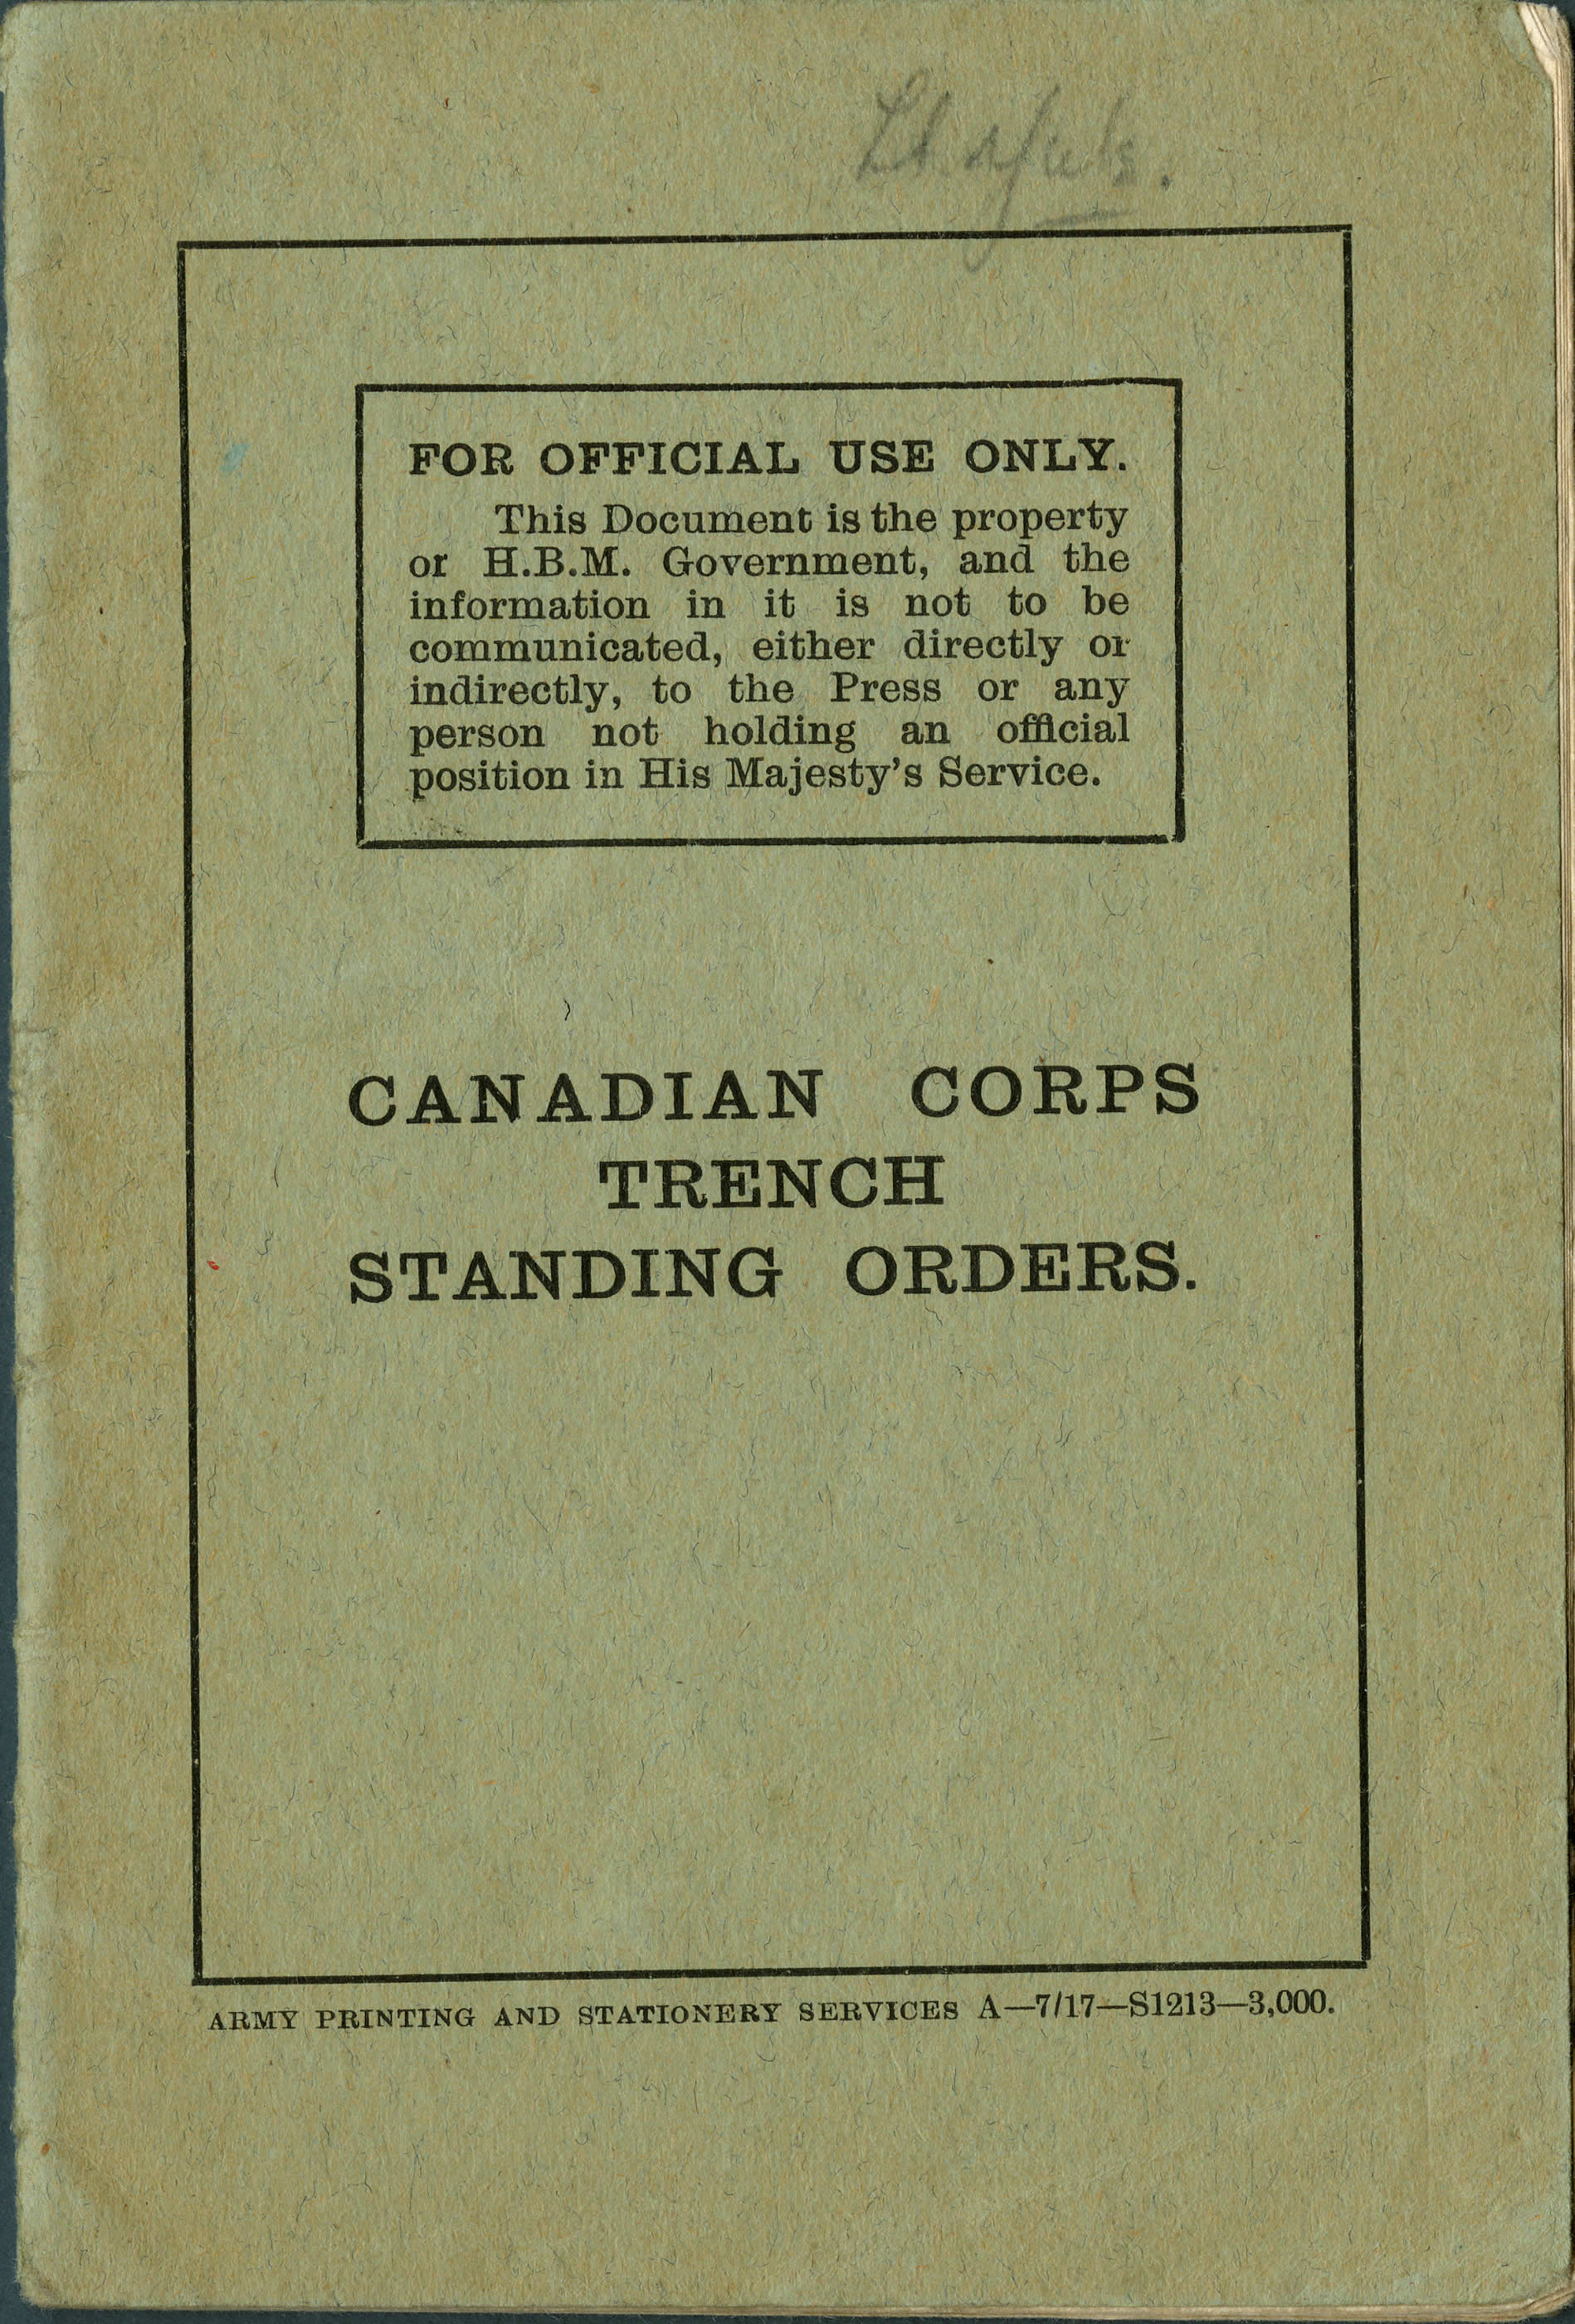 Canadian Corps Trench Standing Orders